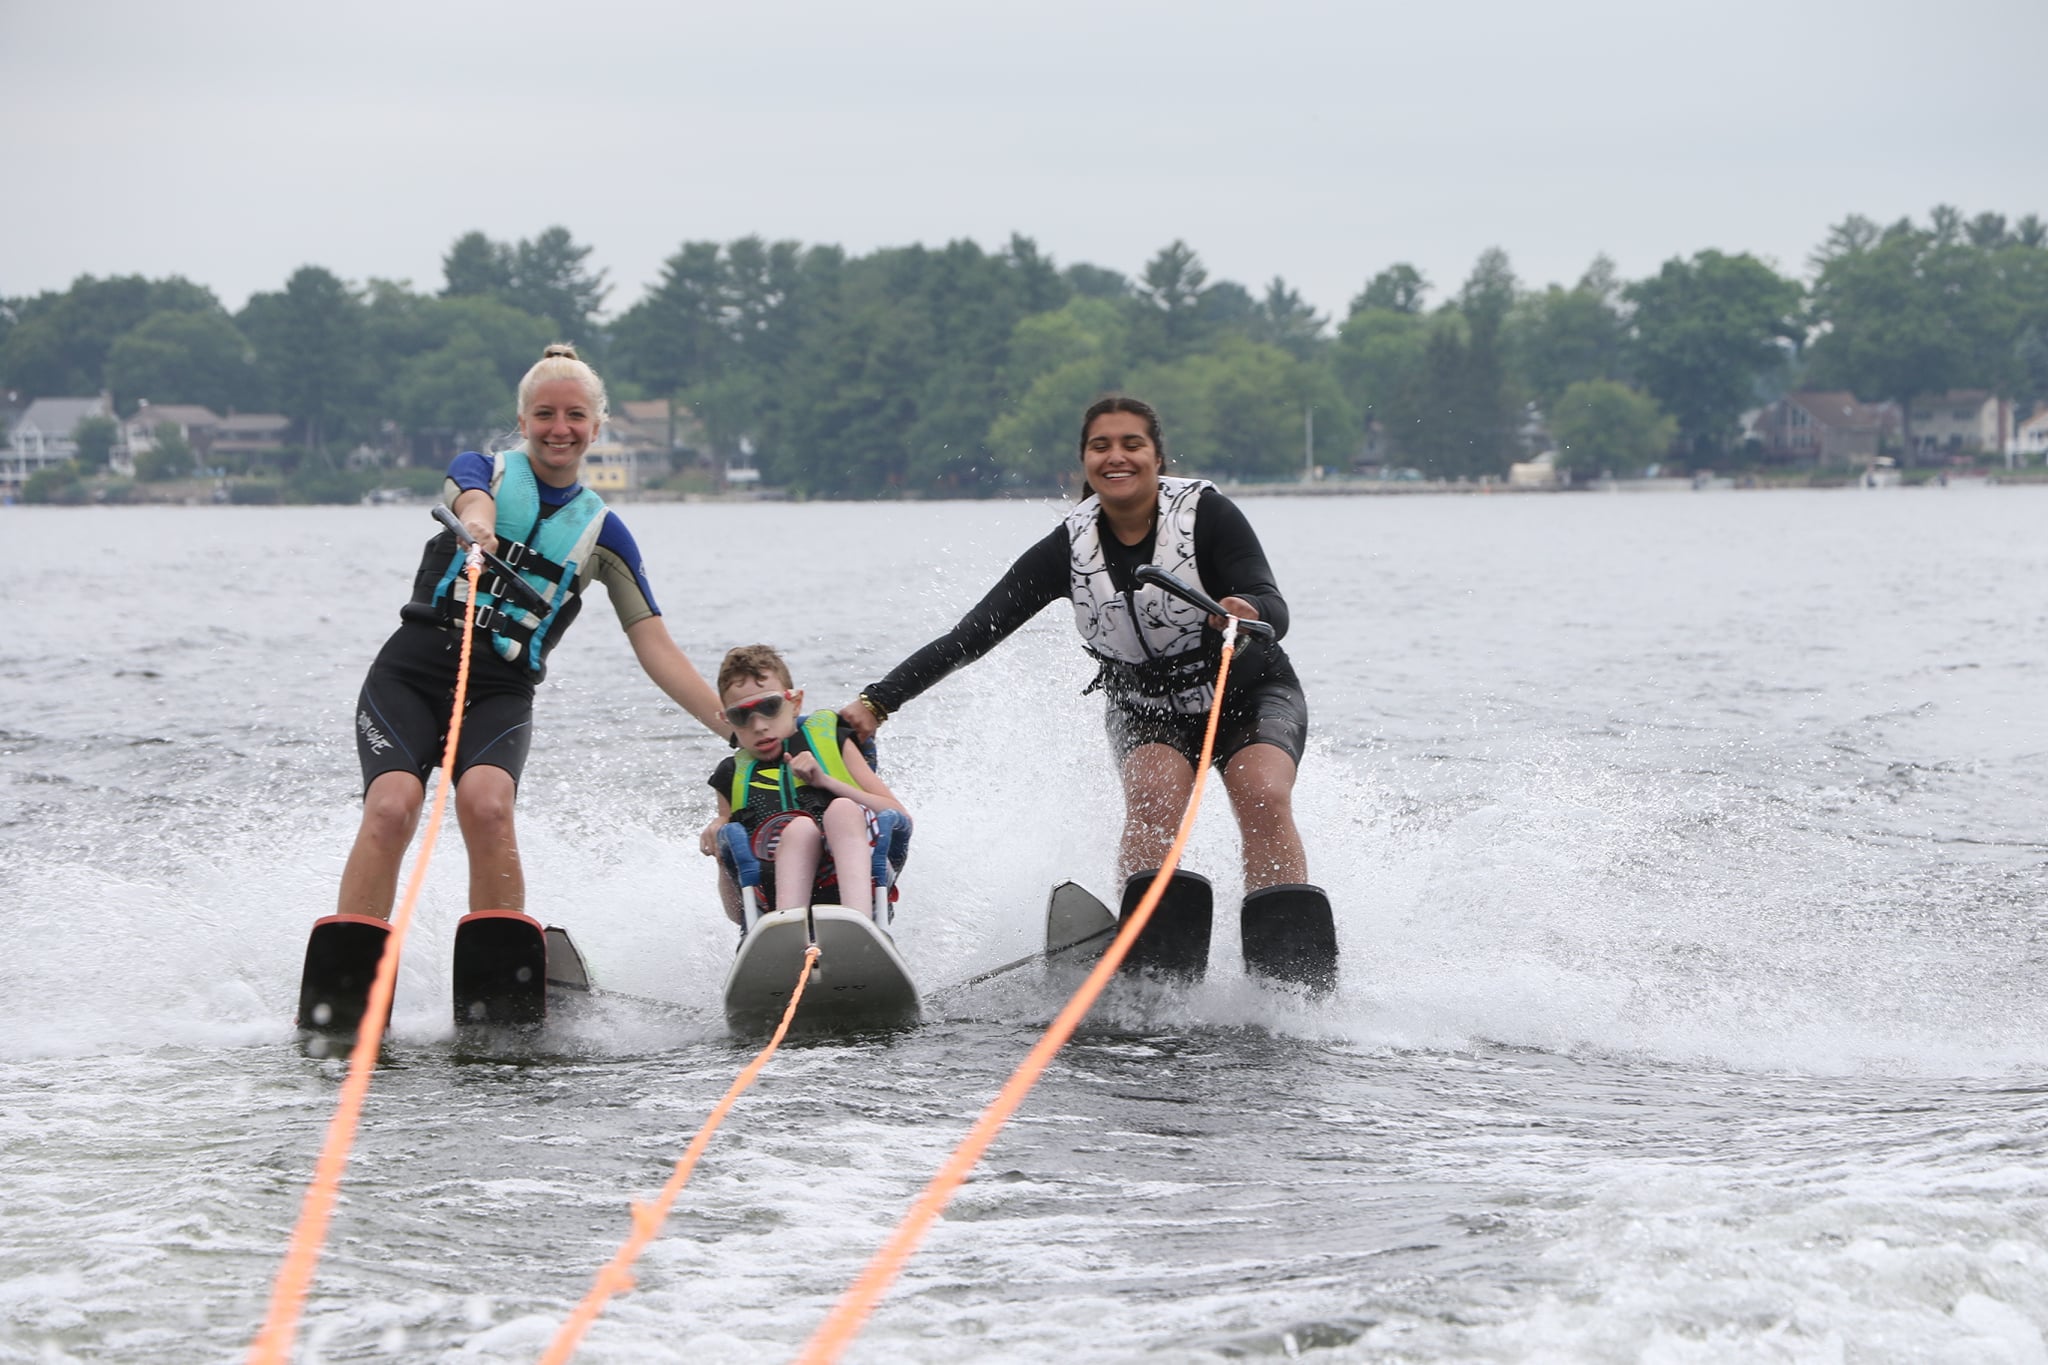 Two people standing on water skis and a person in the middle on a sit water ski